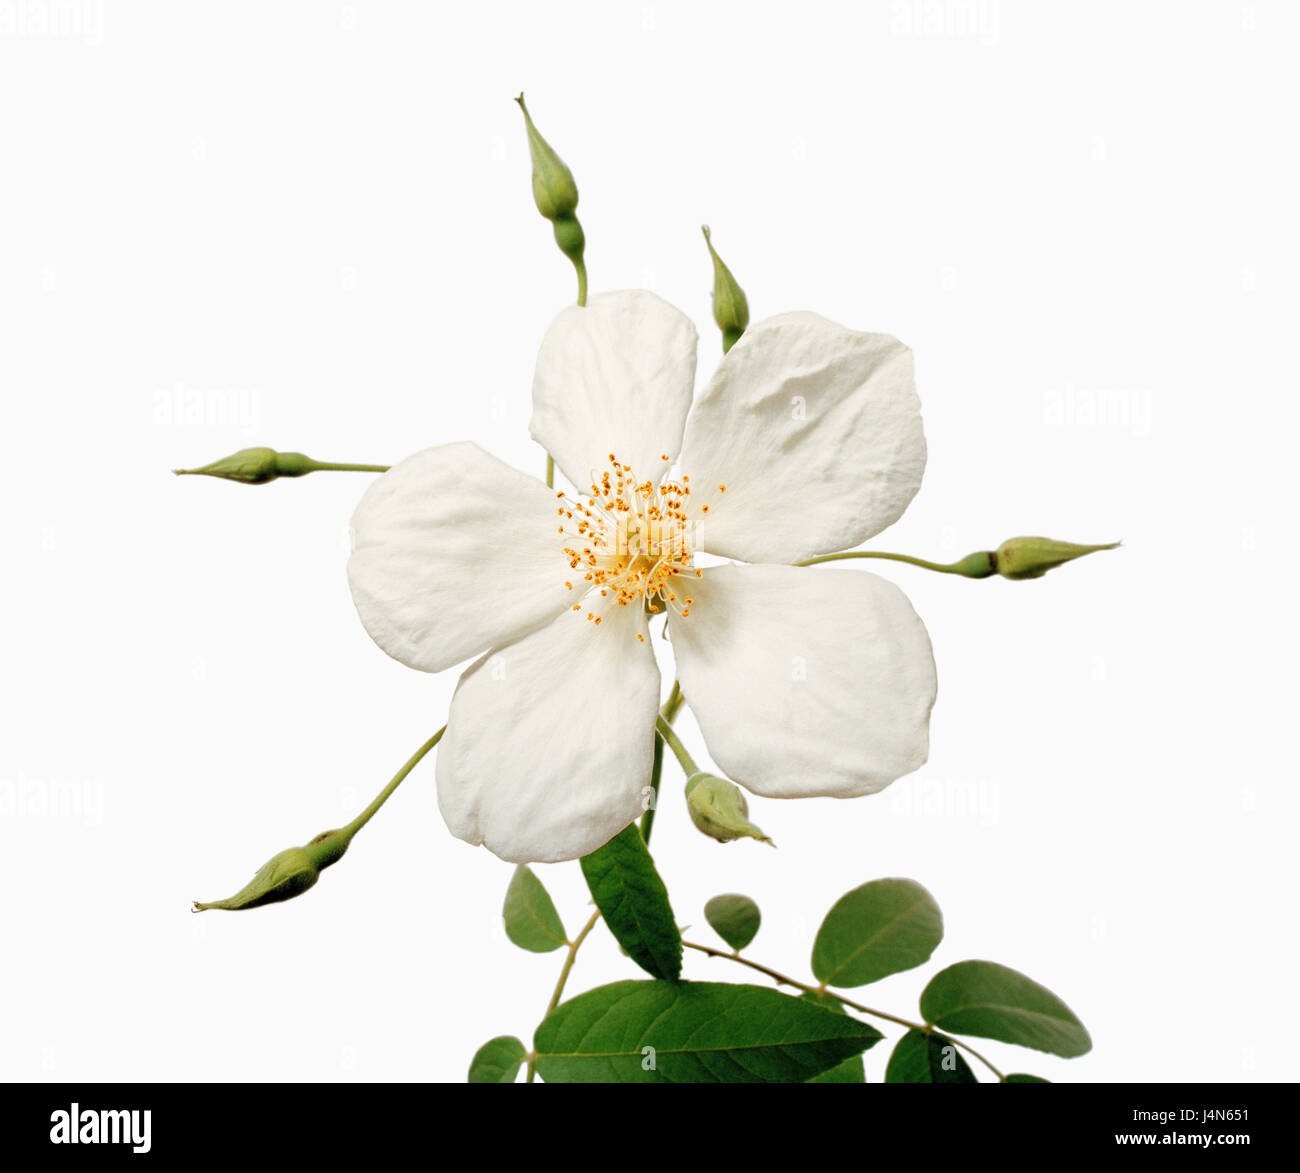 Rose, name: 'La Mortola', wild roses, form of the R. brunonii Lindl., Italy, approx. 1936, Stock Photo